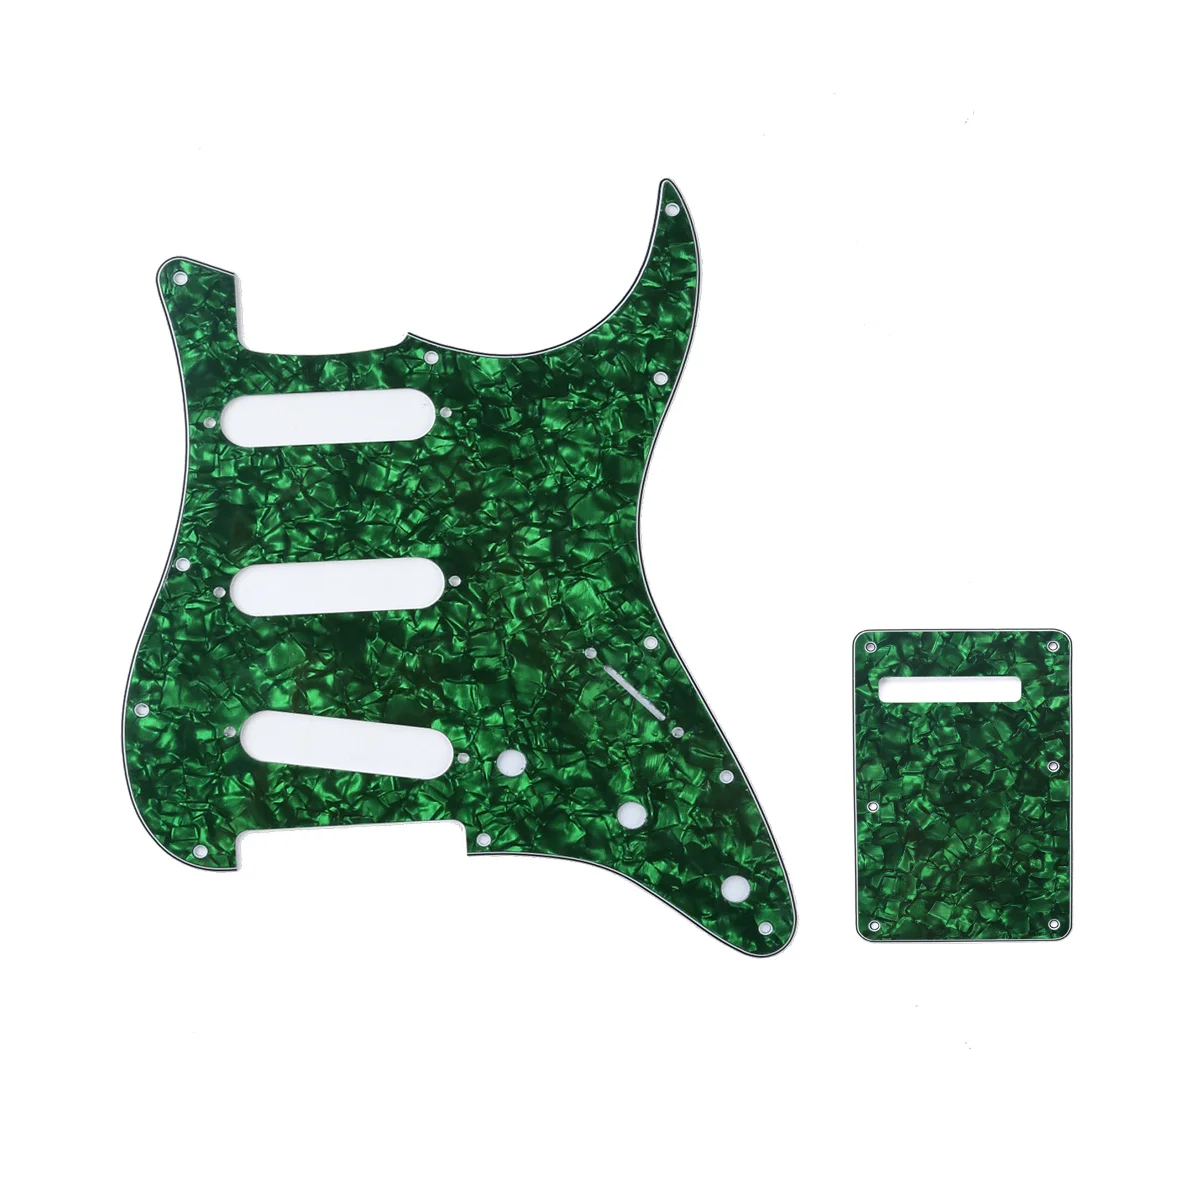 

Musiclily SSS 11 Hole Strat Guitar Pickguard and BackPlate Set for Fender USA/Mexican Standard Stratocaster, 4Ply Green Pearl